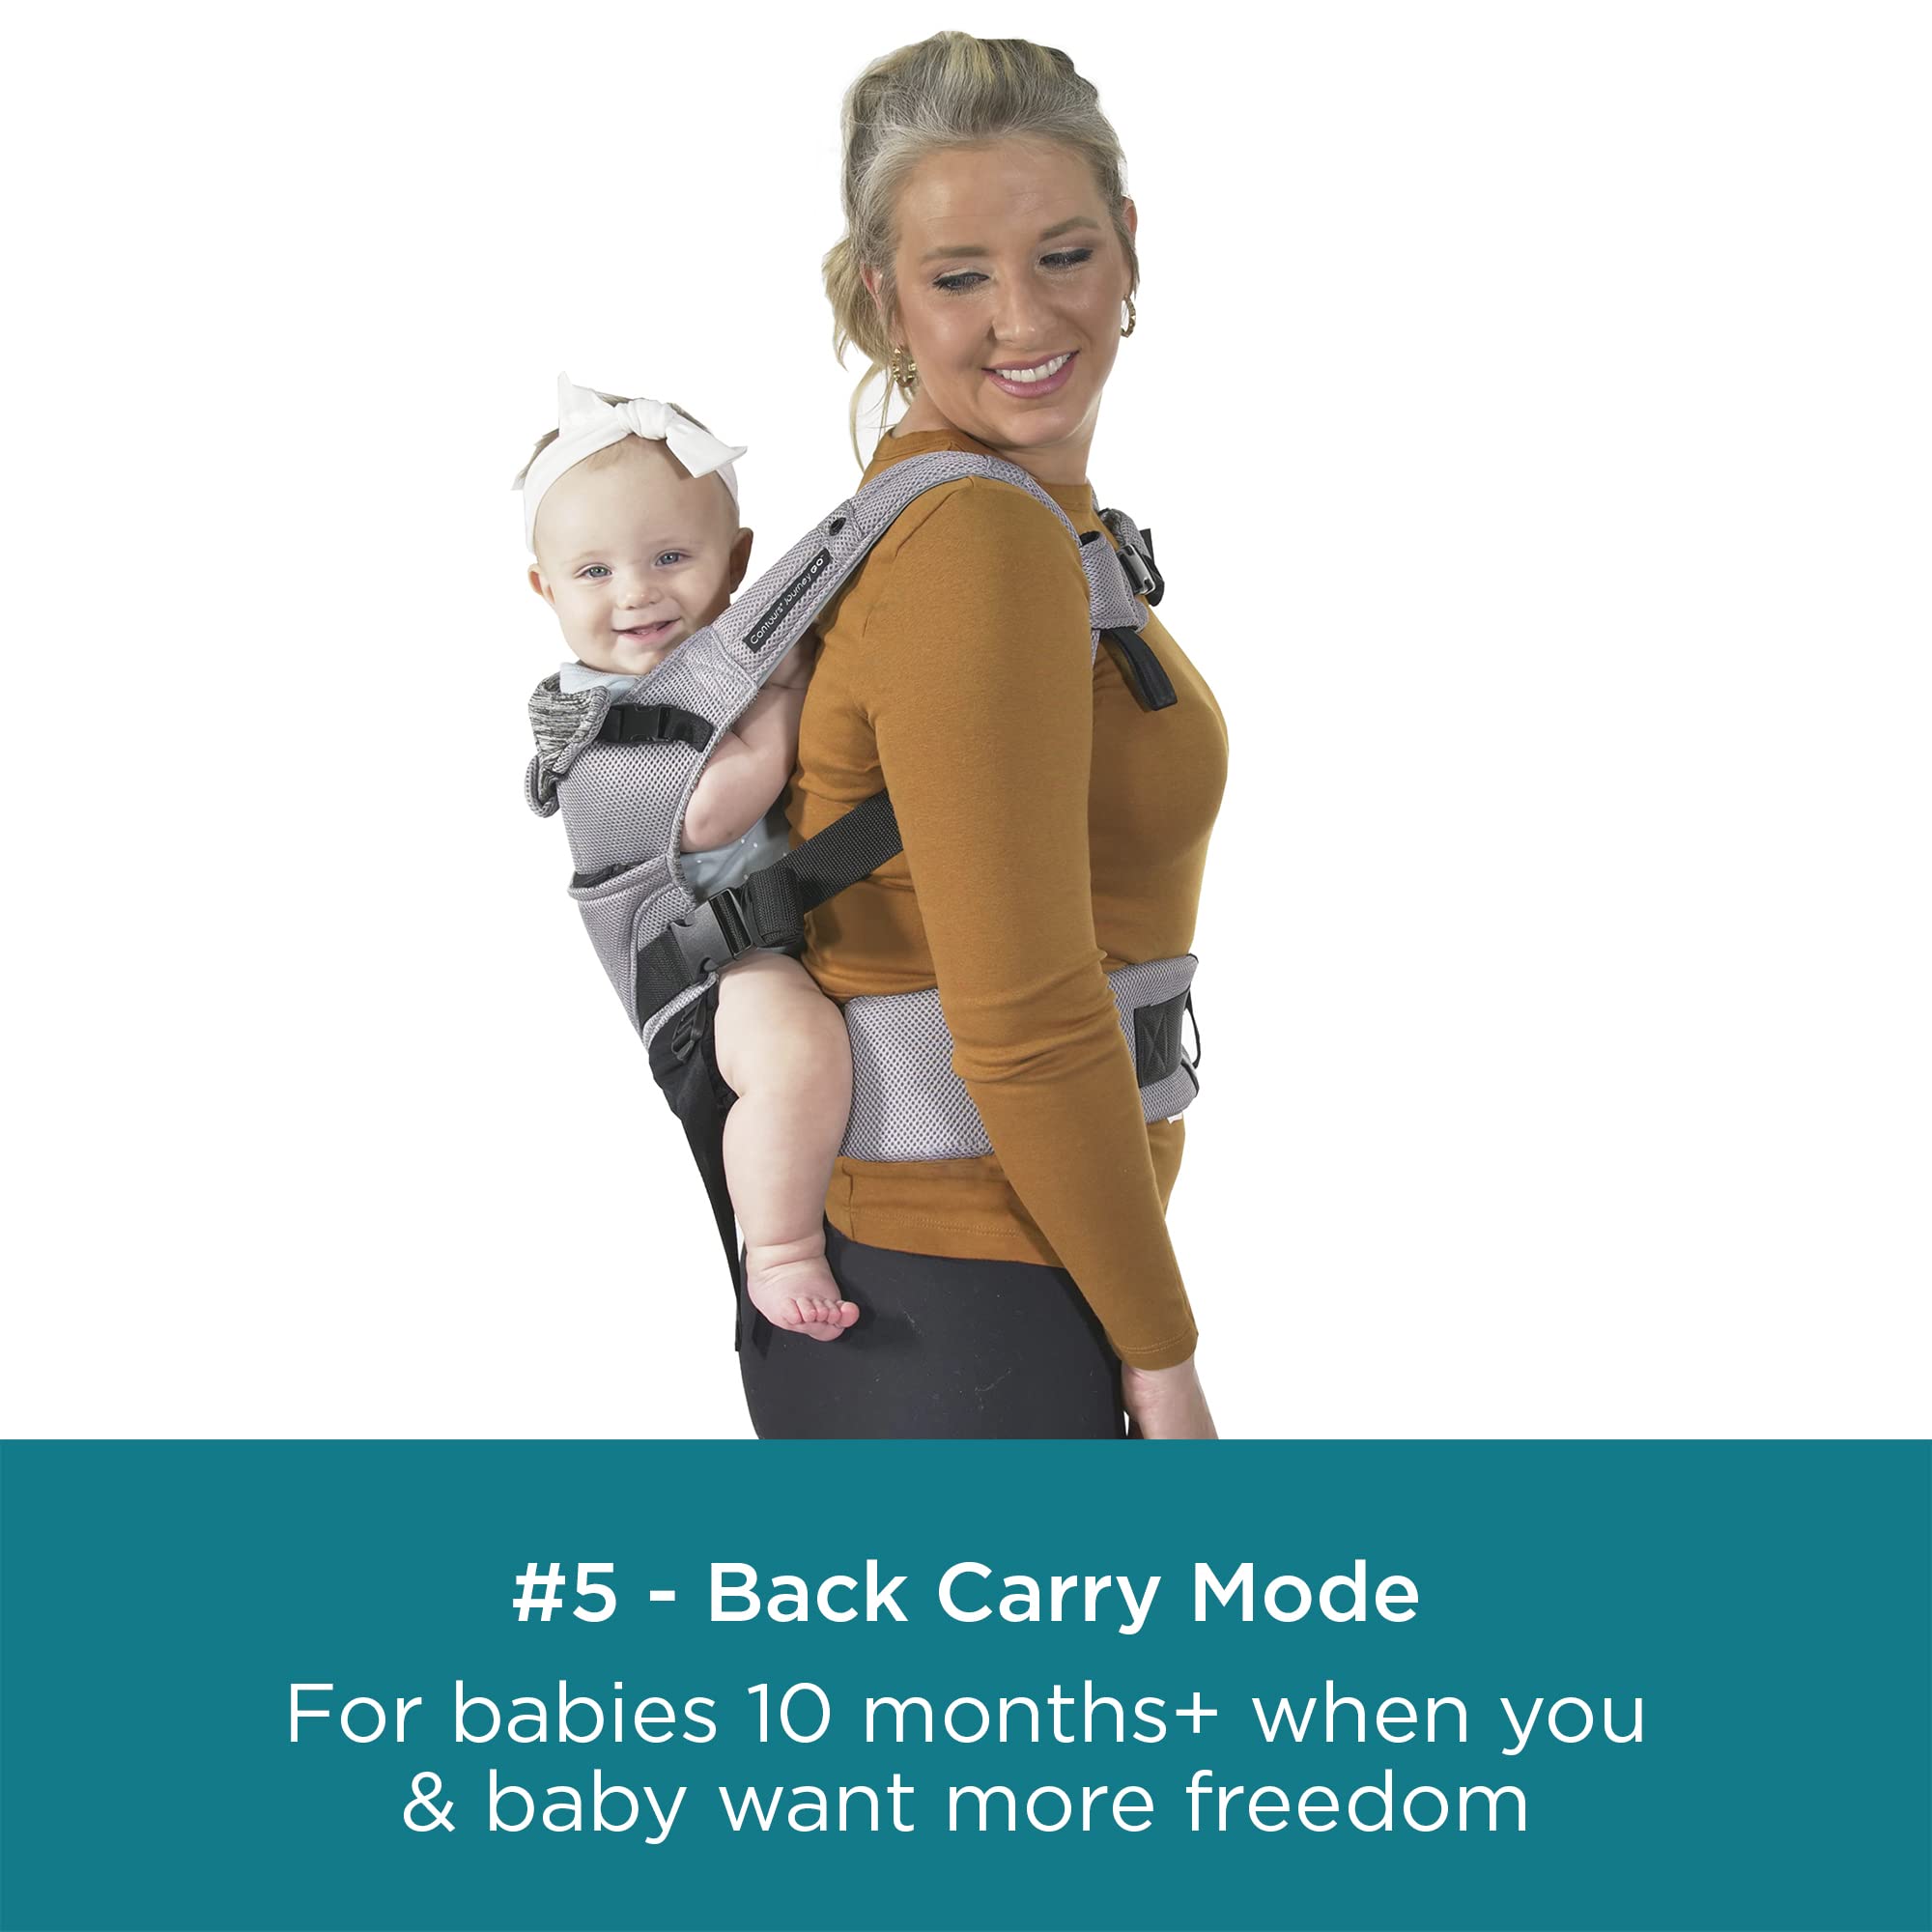 Contours Baby Carrier Newborn to Toddler |Journey GO 5 Position Convertible Easy-to-Use Baby Carrier with Pockets for Men and Women, Face in, Face Out, Front, Back & Hip (8-45 lbs) - Daydream Gray